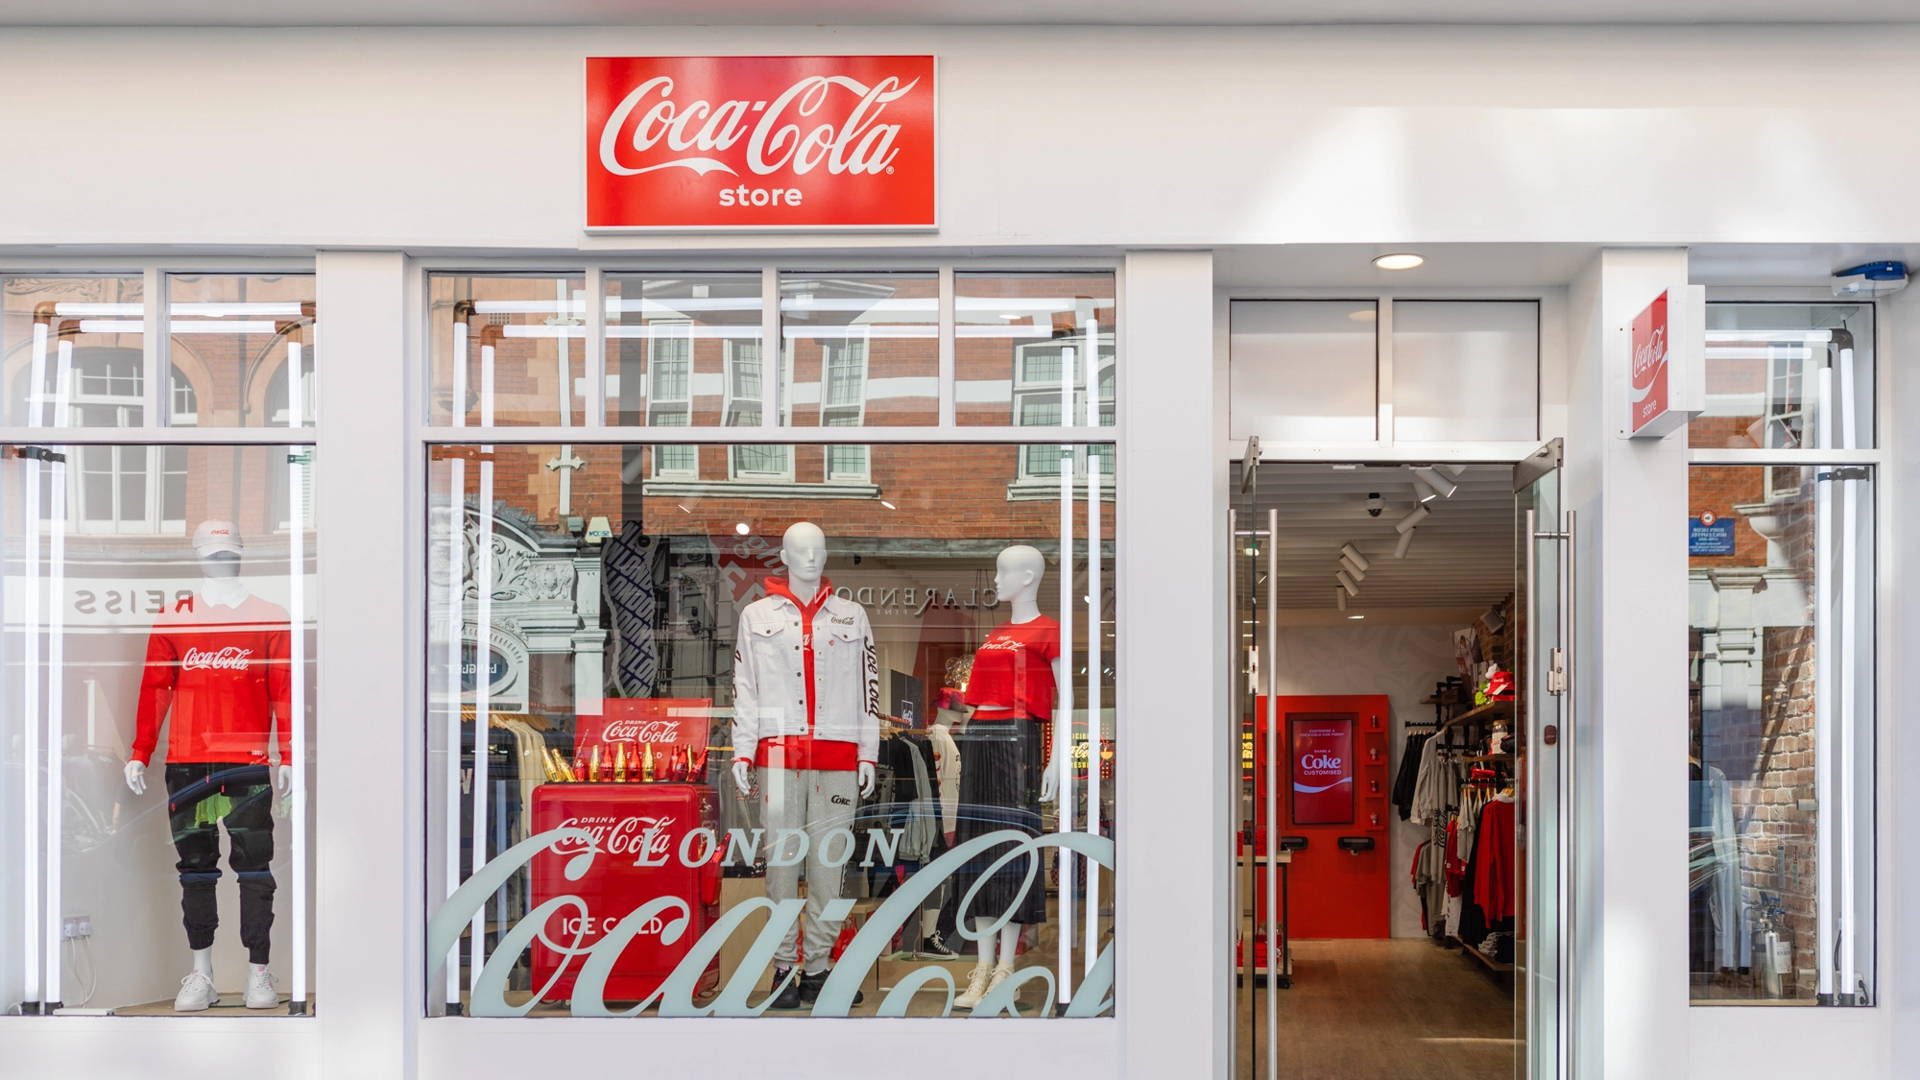 Coca-Cola Opens UK Pop-Up Store With High-end Fashion Collabs and